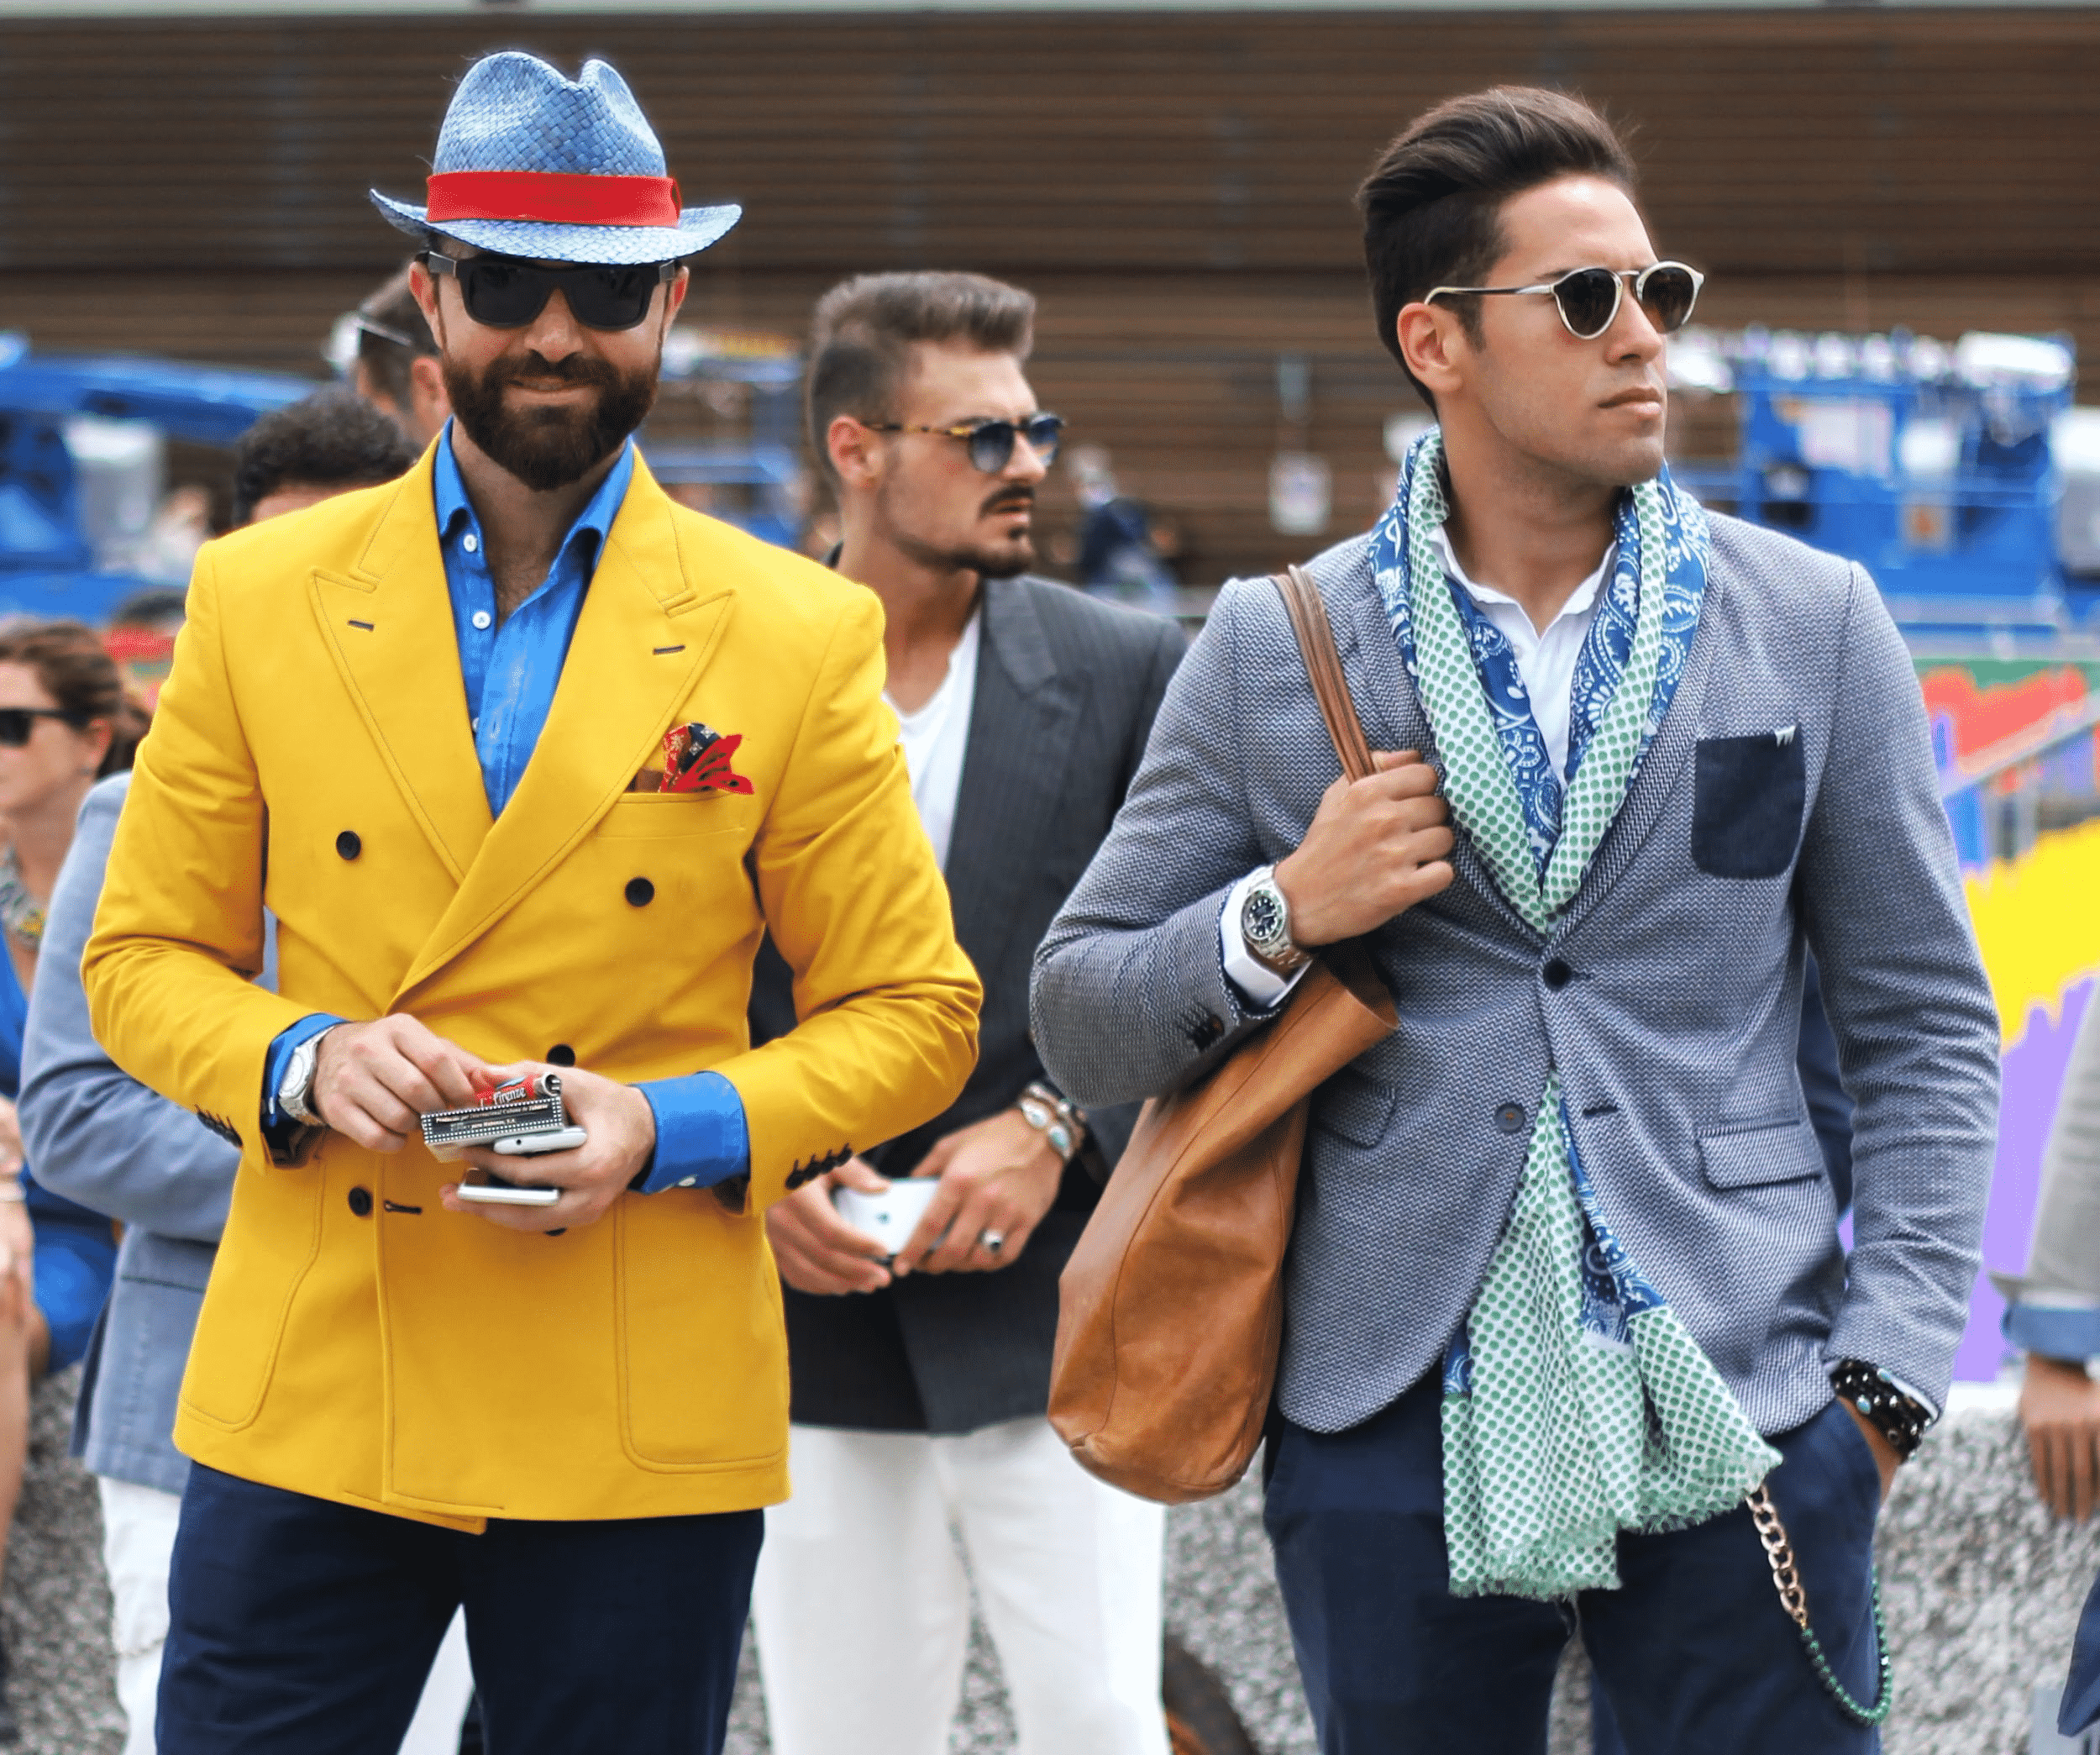 Two men with different fashions